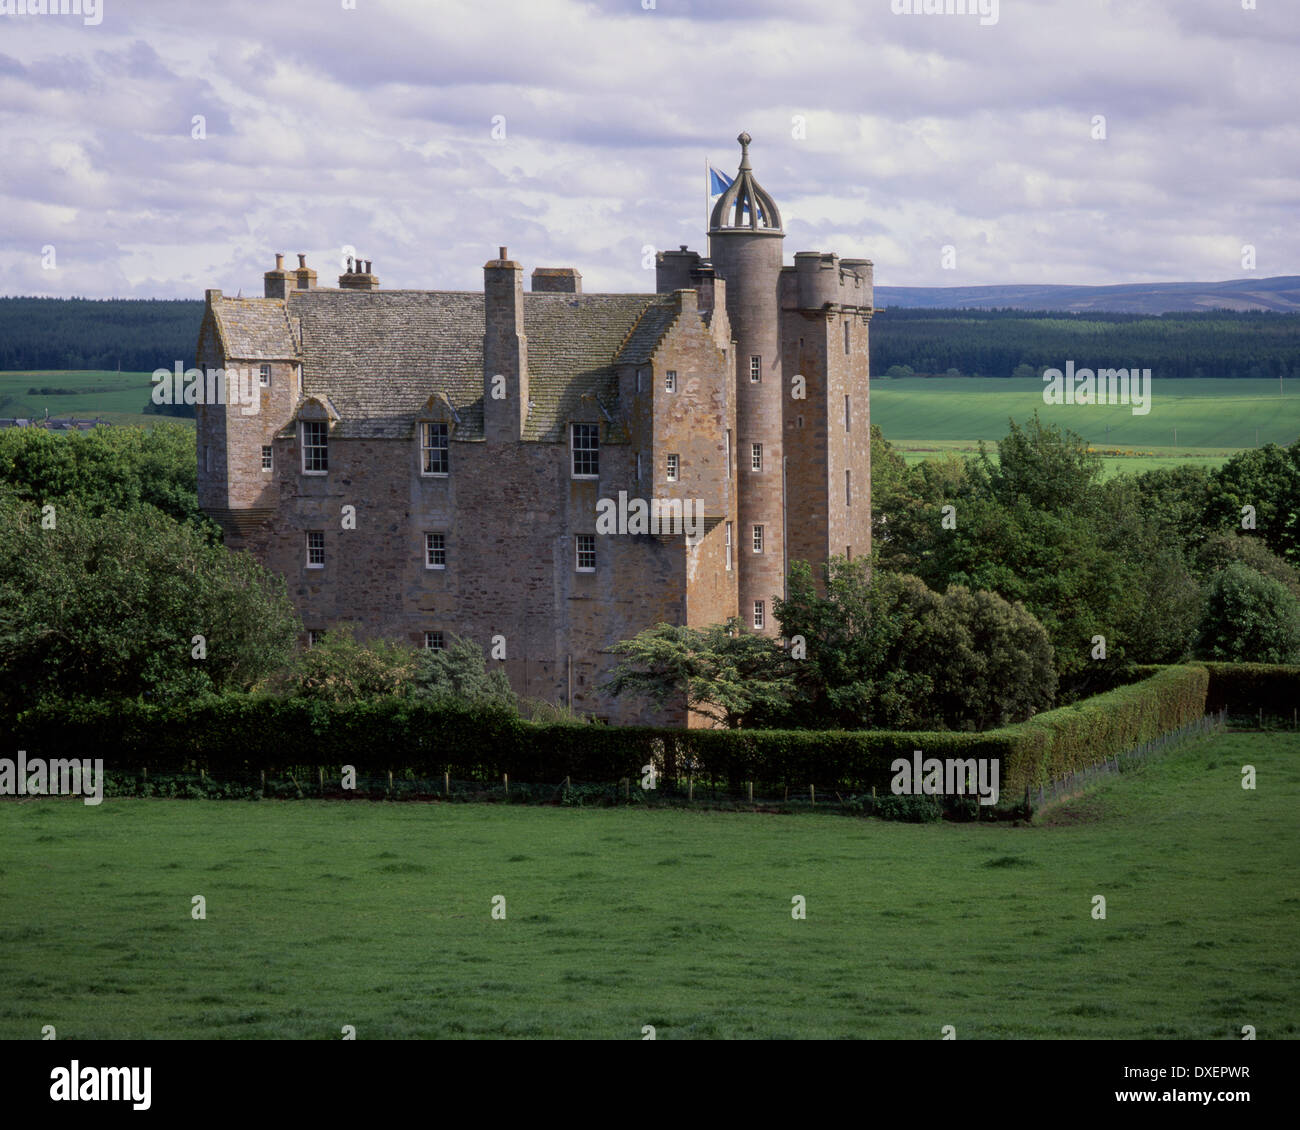 Stuart castle, 1st earl of Moray, built in 1625 situated nr Inverness, Moray Firth. Stock Photo